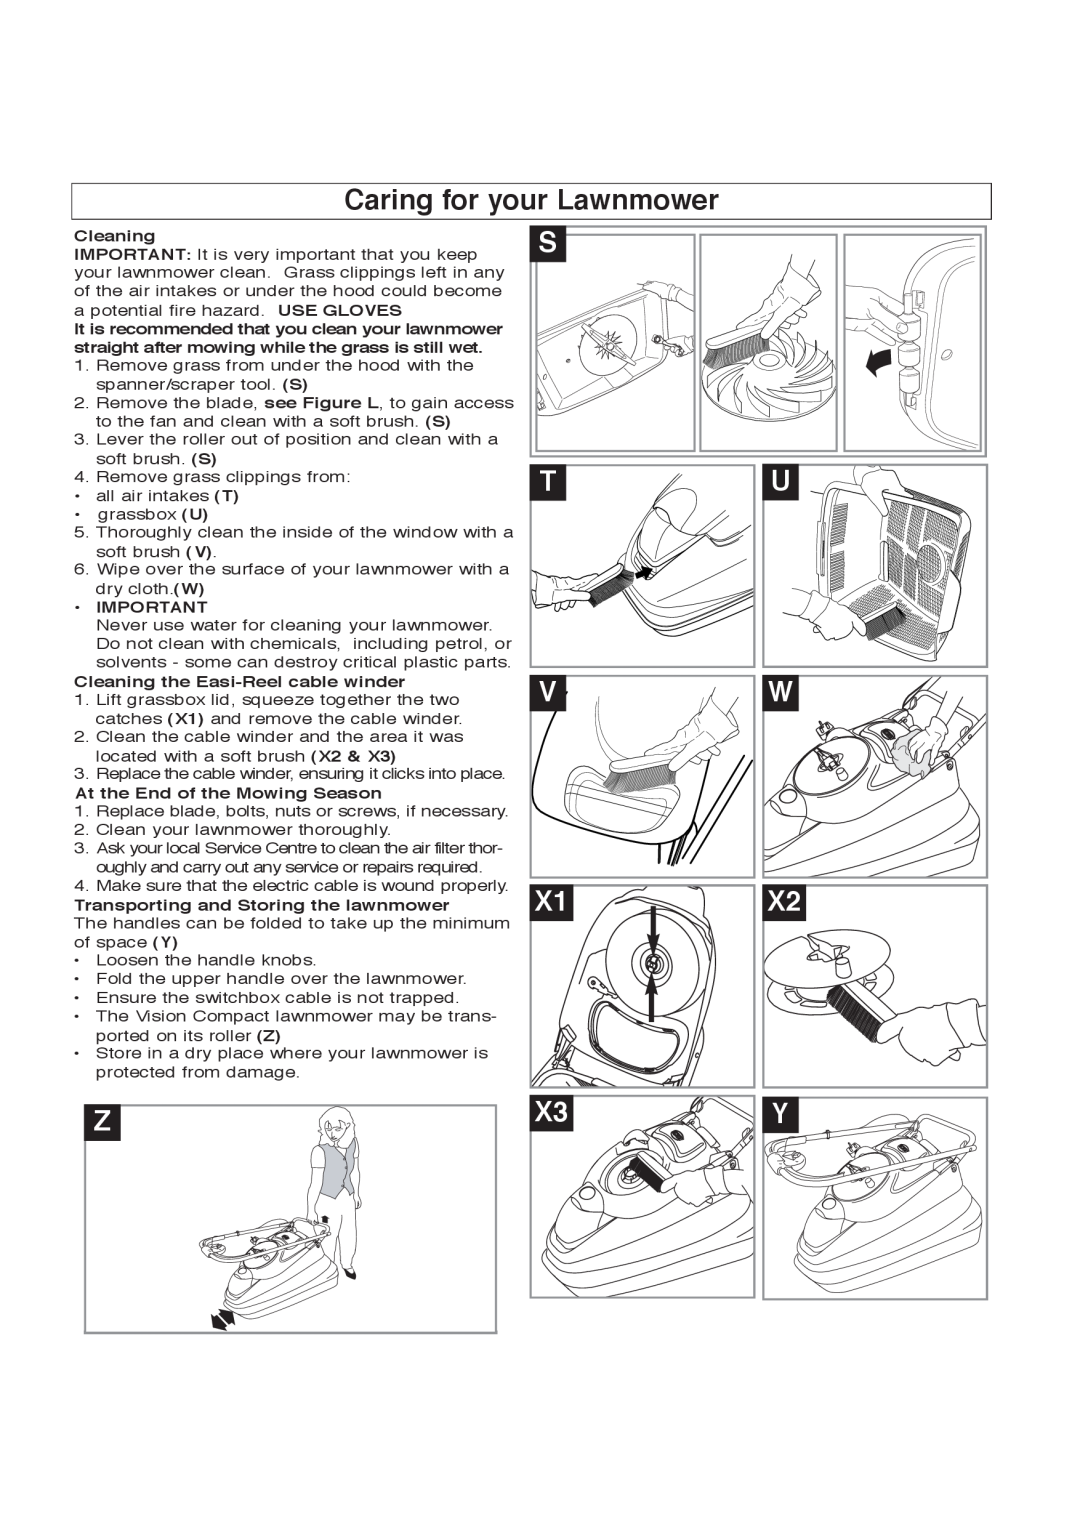 Flymo 380 manual Caring for your Lawnmower 